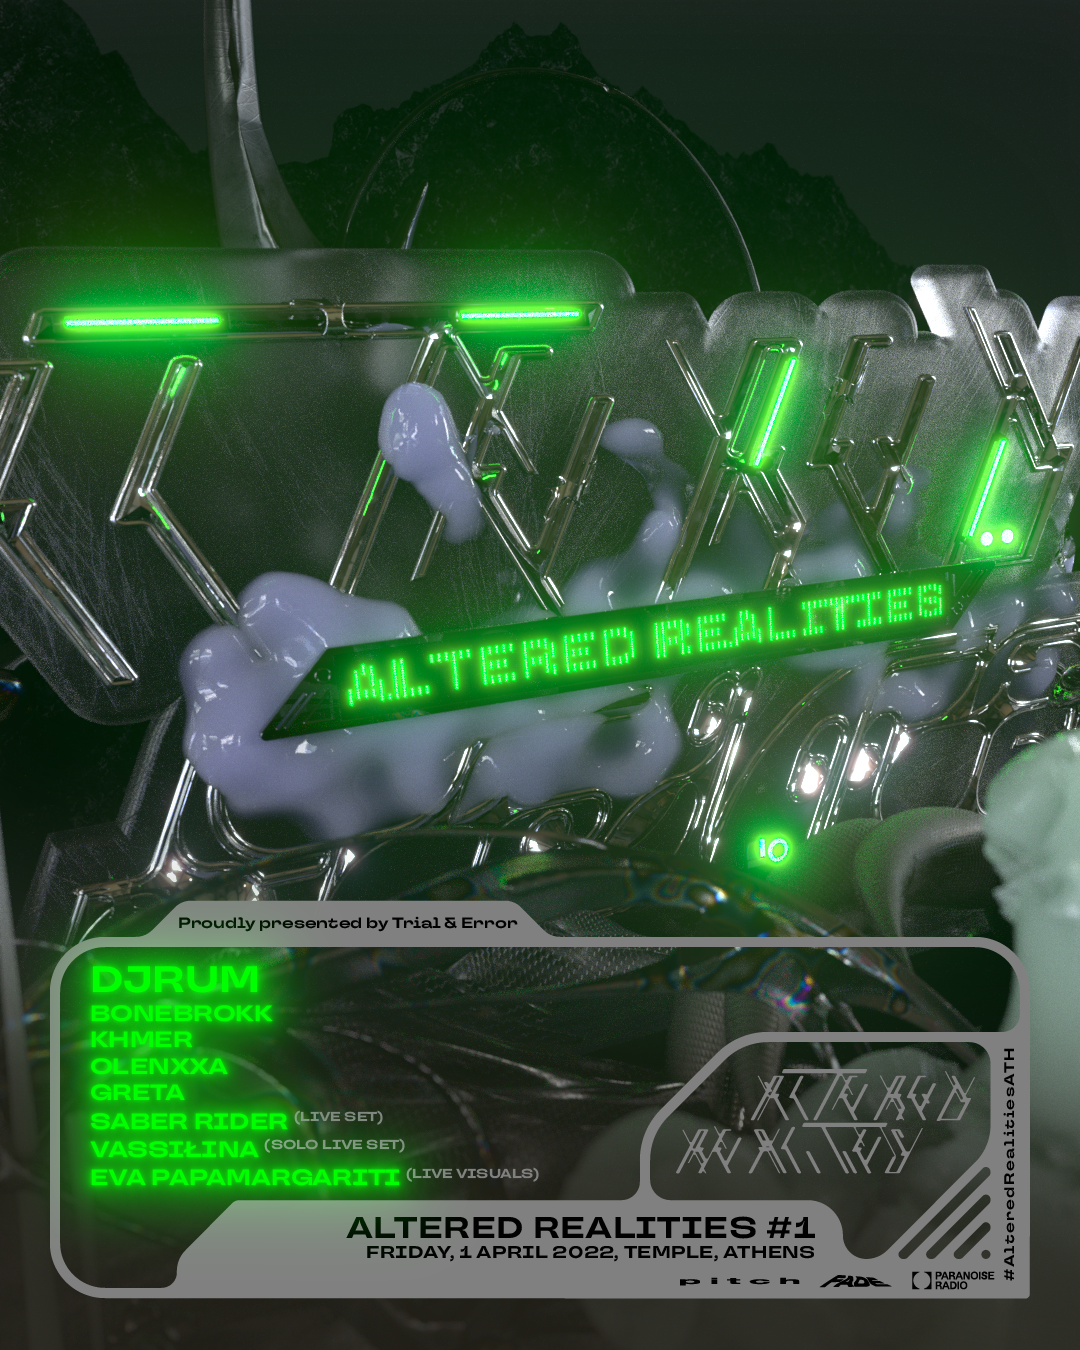 [CANCELLED] Altered Realities 1 with DjRUM - フライヤー表